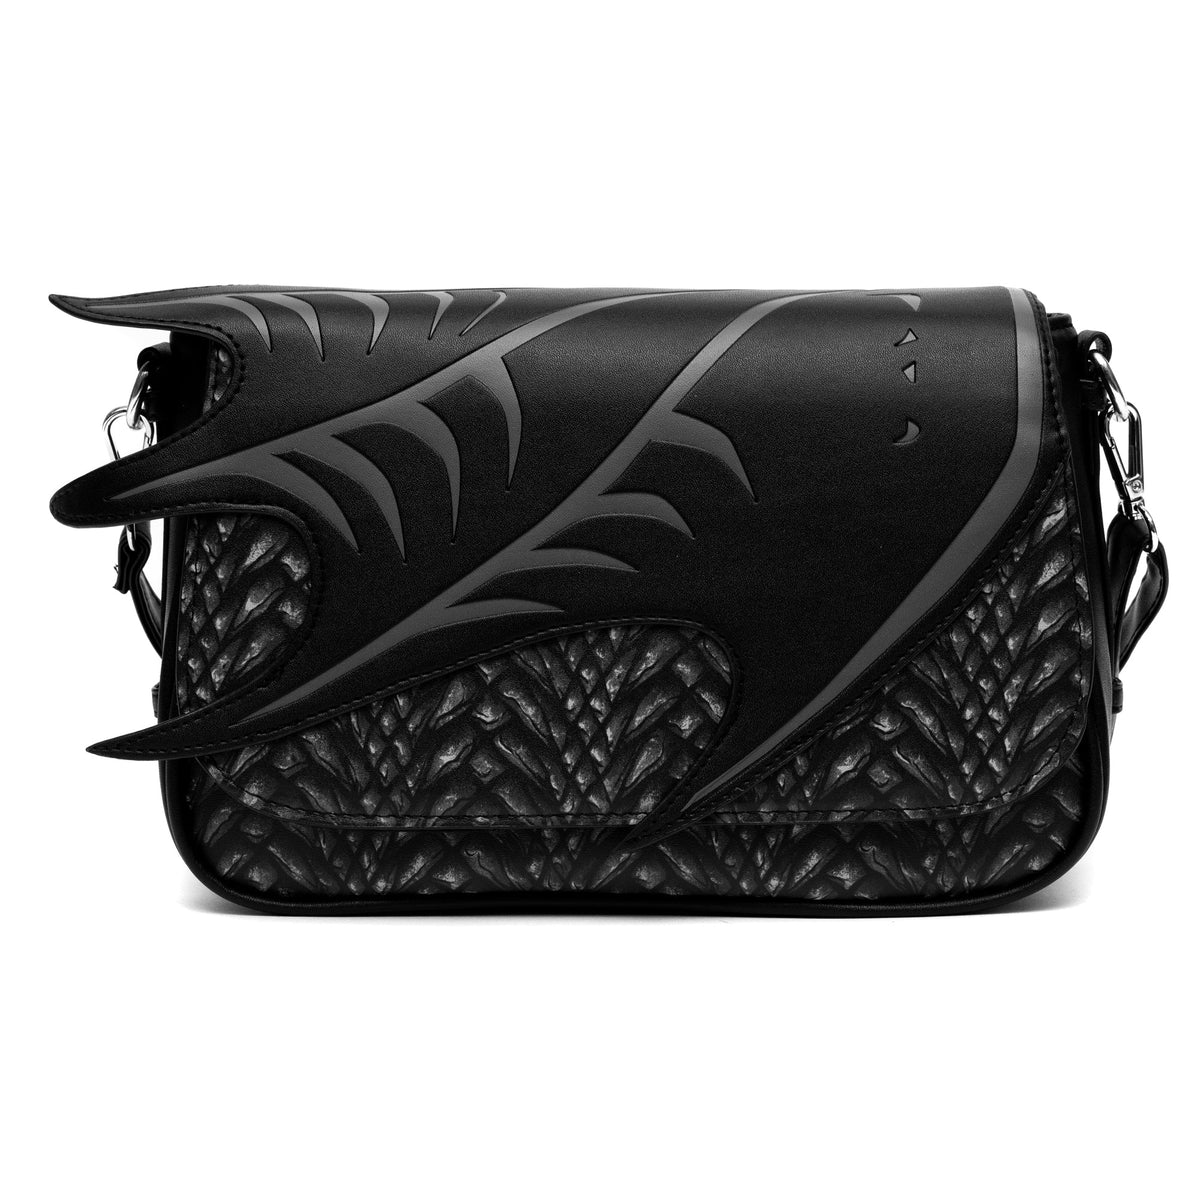 Game of Thrones Bag, Fold Over Cross Body, Game of Thrones The Dragon Awakens Dragon Print Wing Applique, Vegan Leather